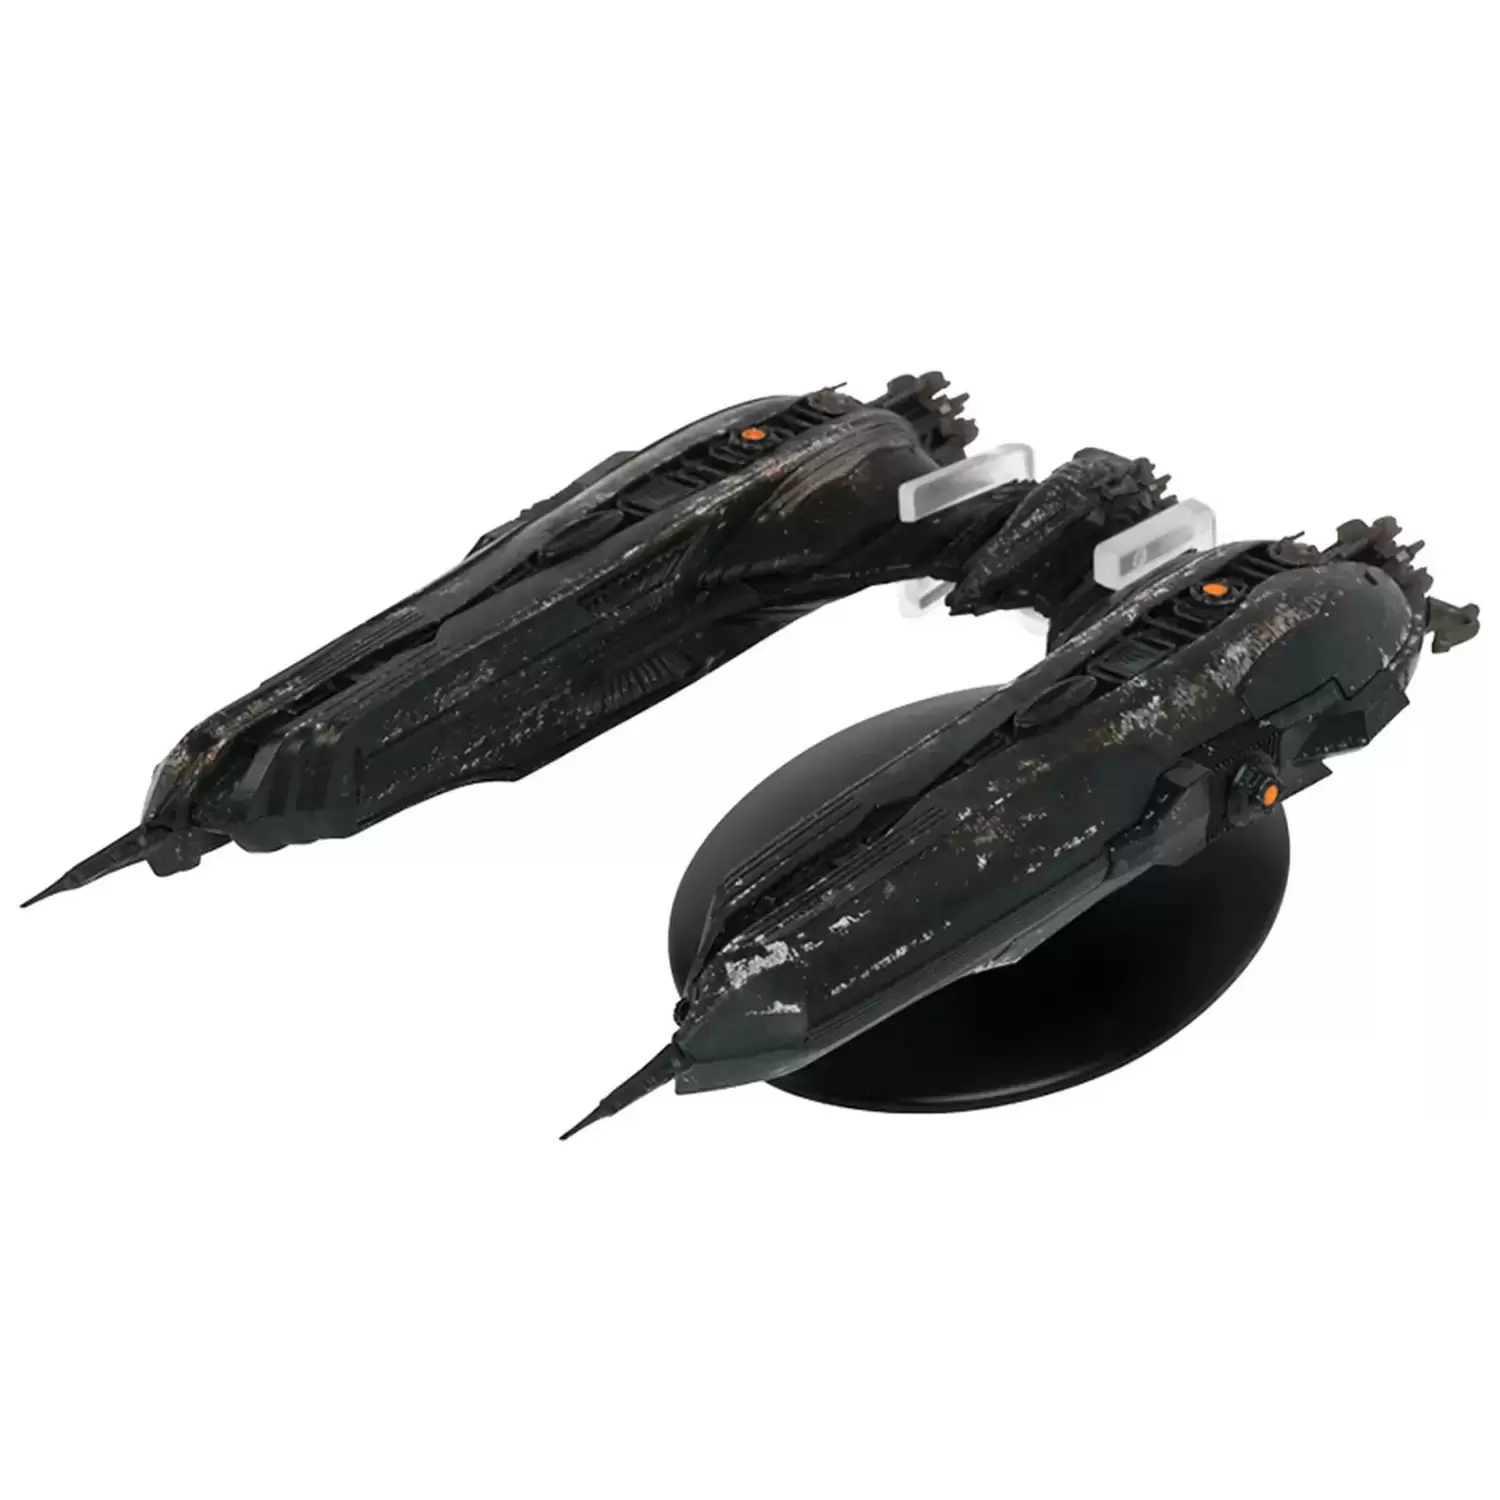 Star Trek Discovery The Official Starships Collection - Klingon Chargh Class